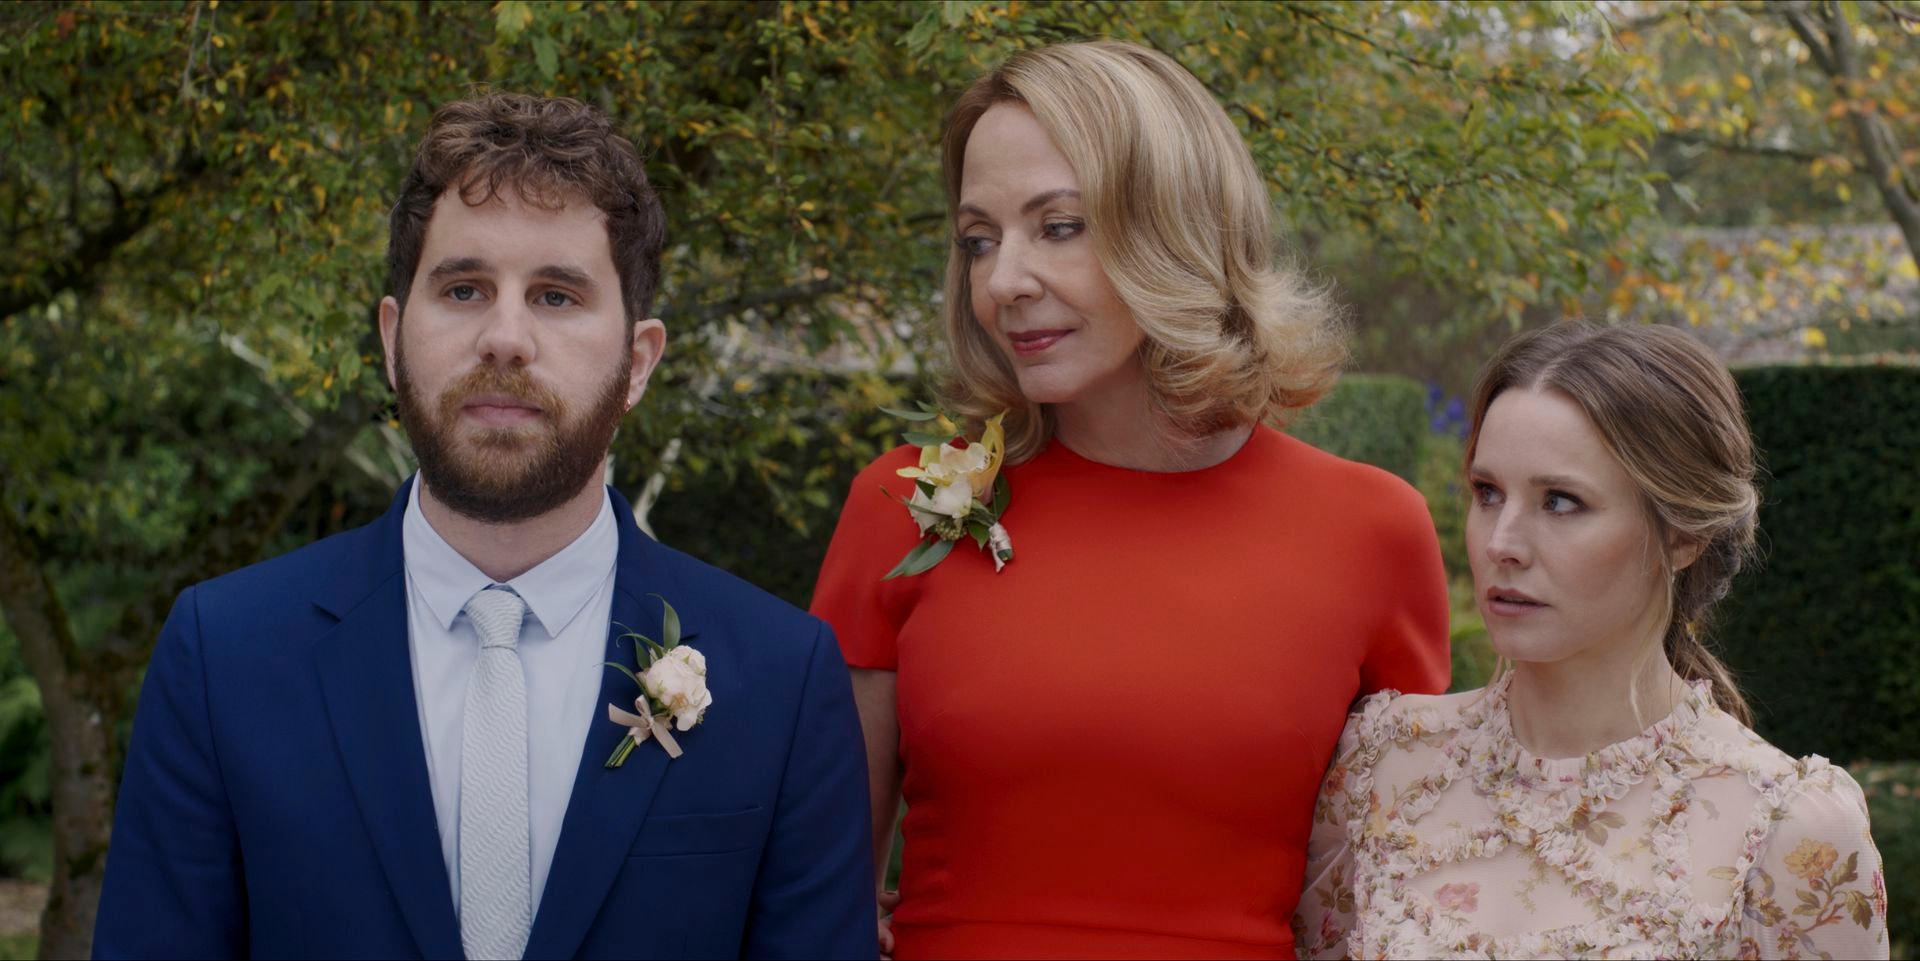 A man in a blue suit with a pink floral corsage (Ben Platt) stands next to a woman in a red dress with a yellow floral corsage (Allison Janney) and a woman in a pink floral dress (Kristen Bell) with a forest of trees and hedges in the background.